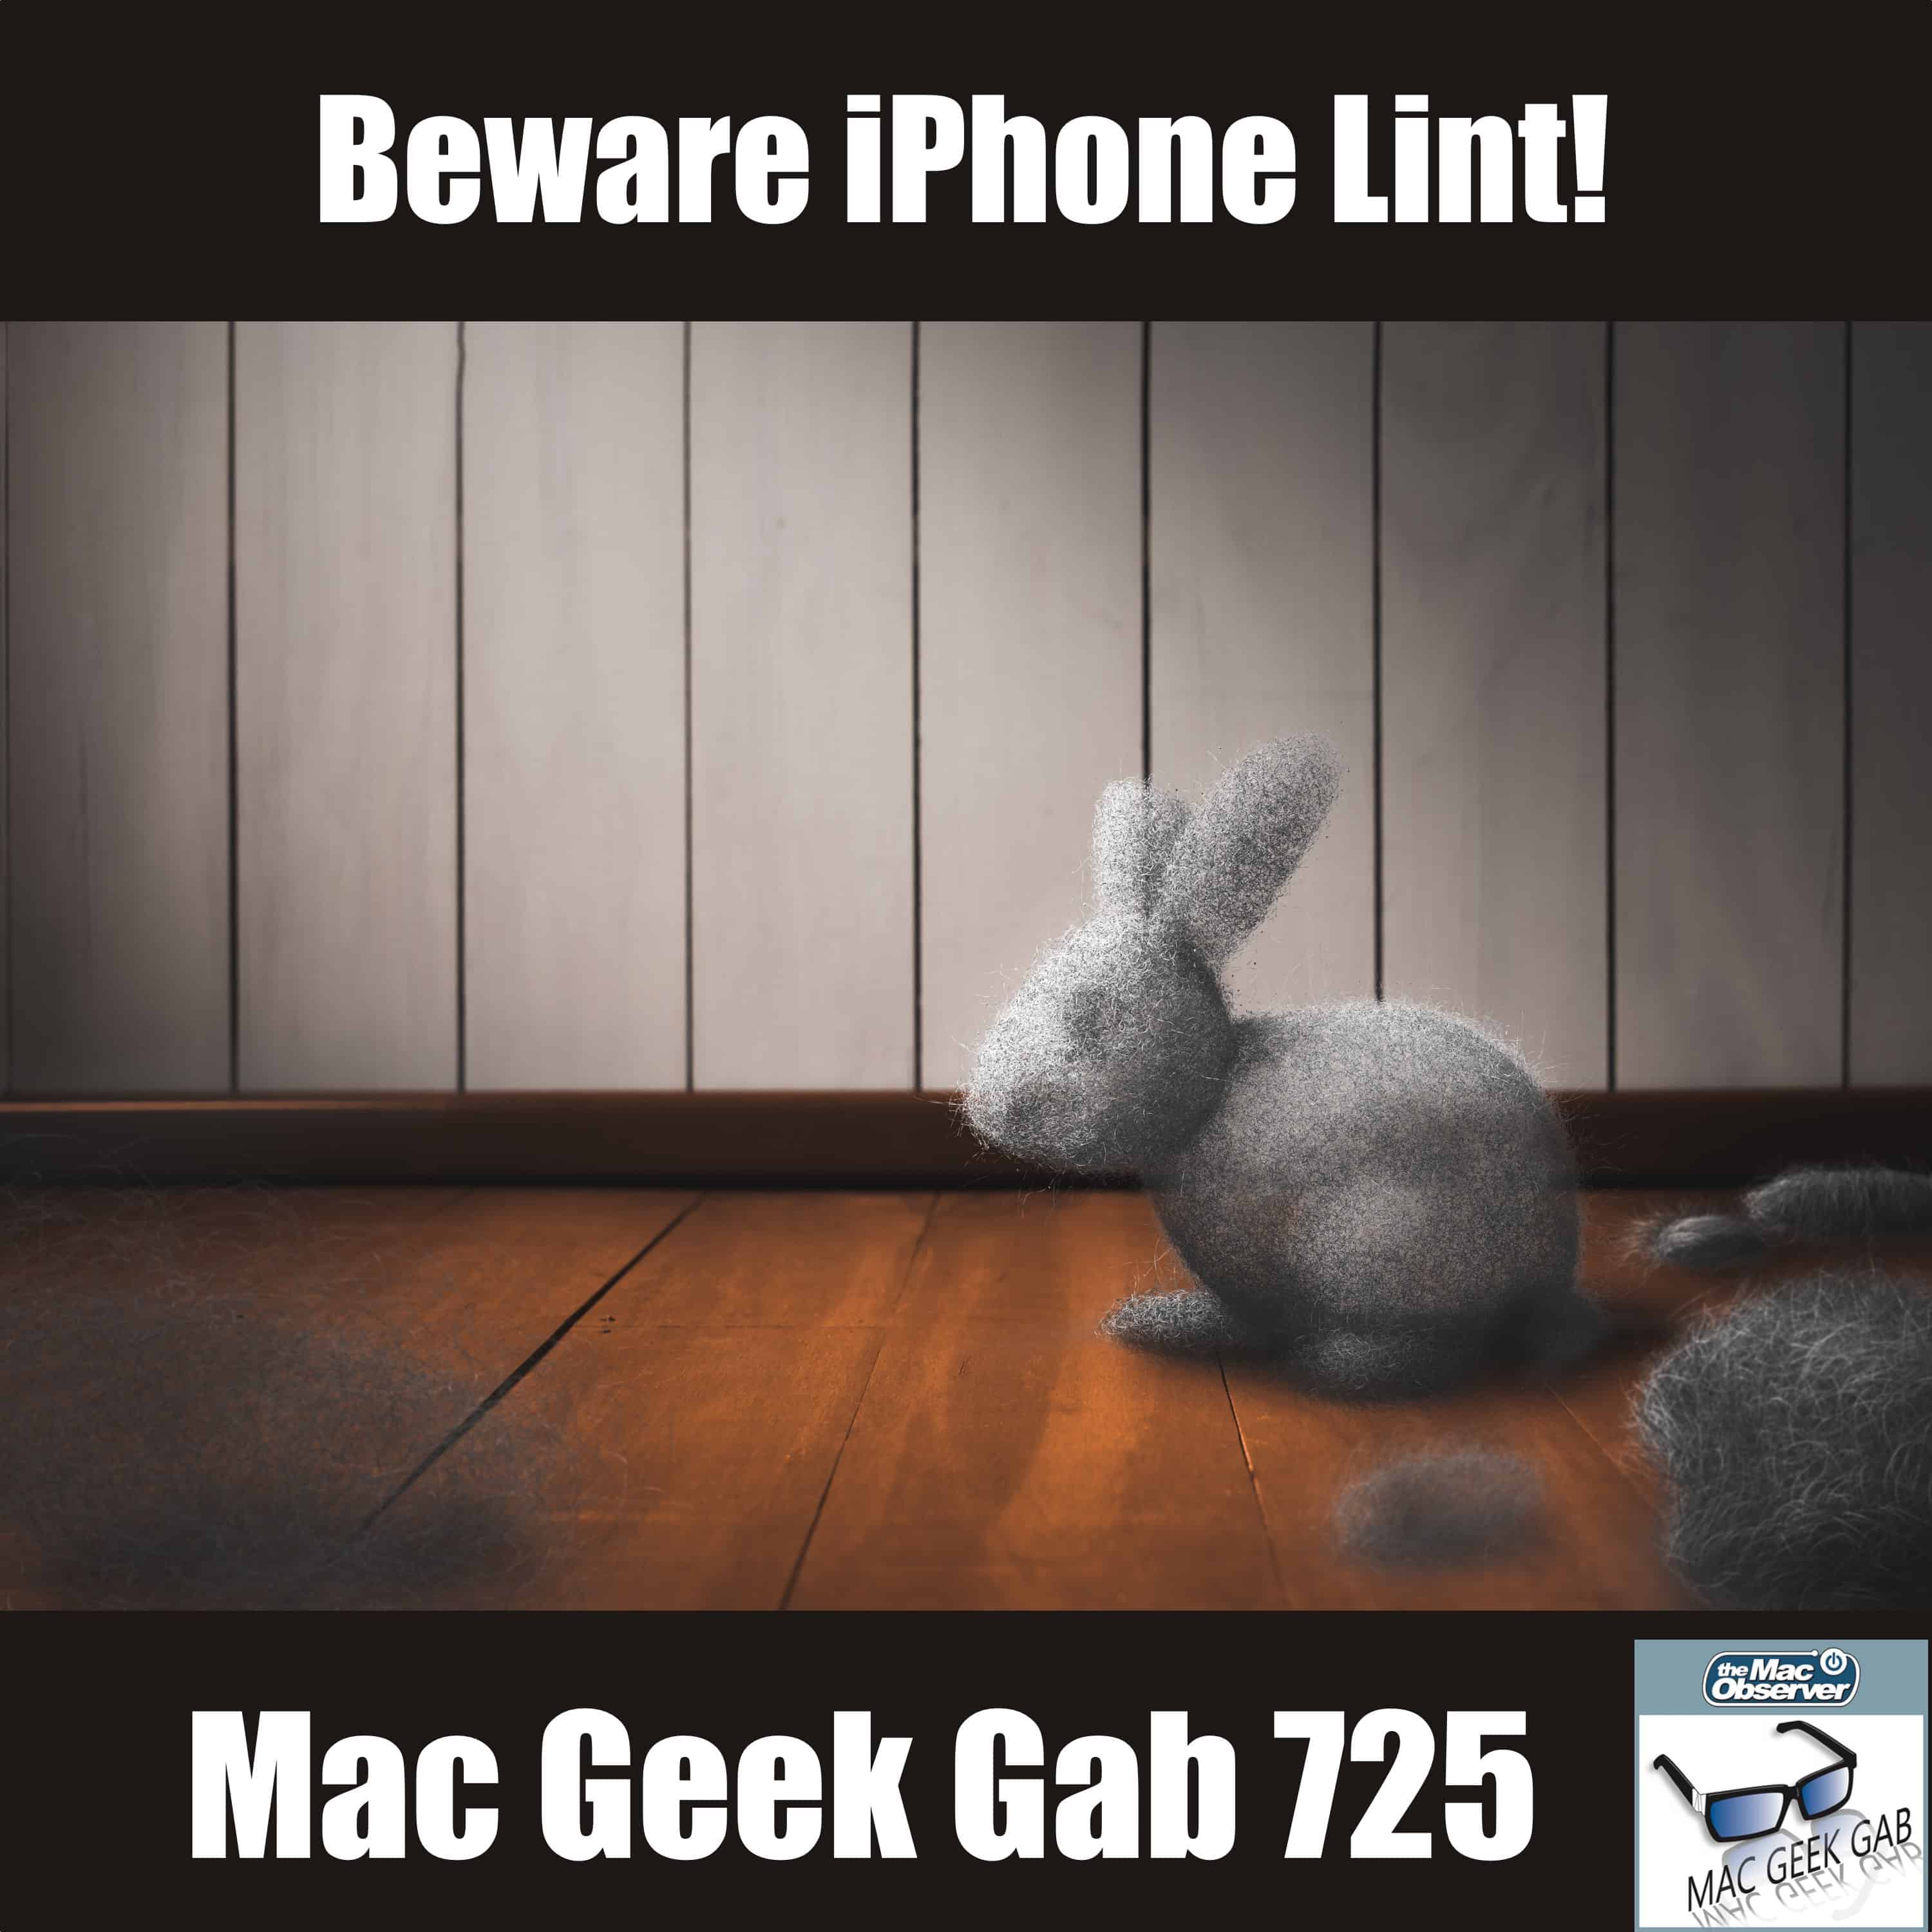 Back to School CSF, APFS on Externals, Cable Modems, and Beware iPhone Lint! – Mac Geek Gab 725